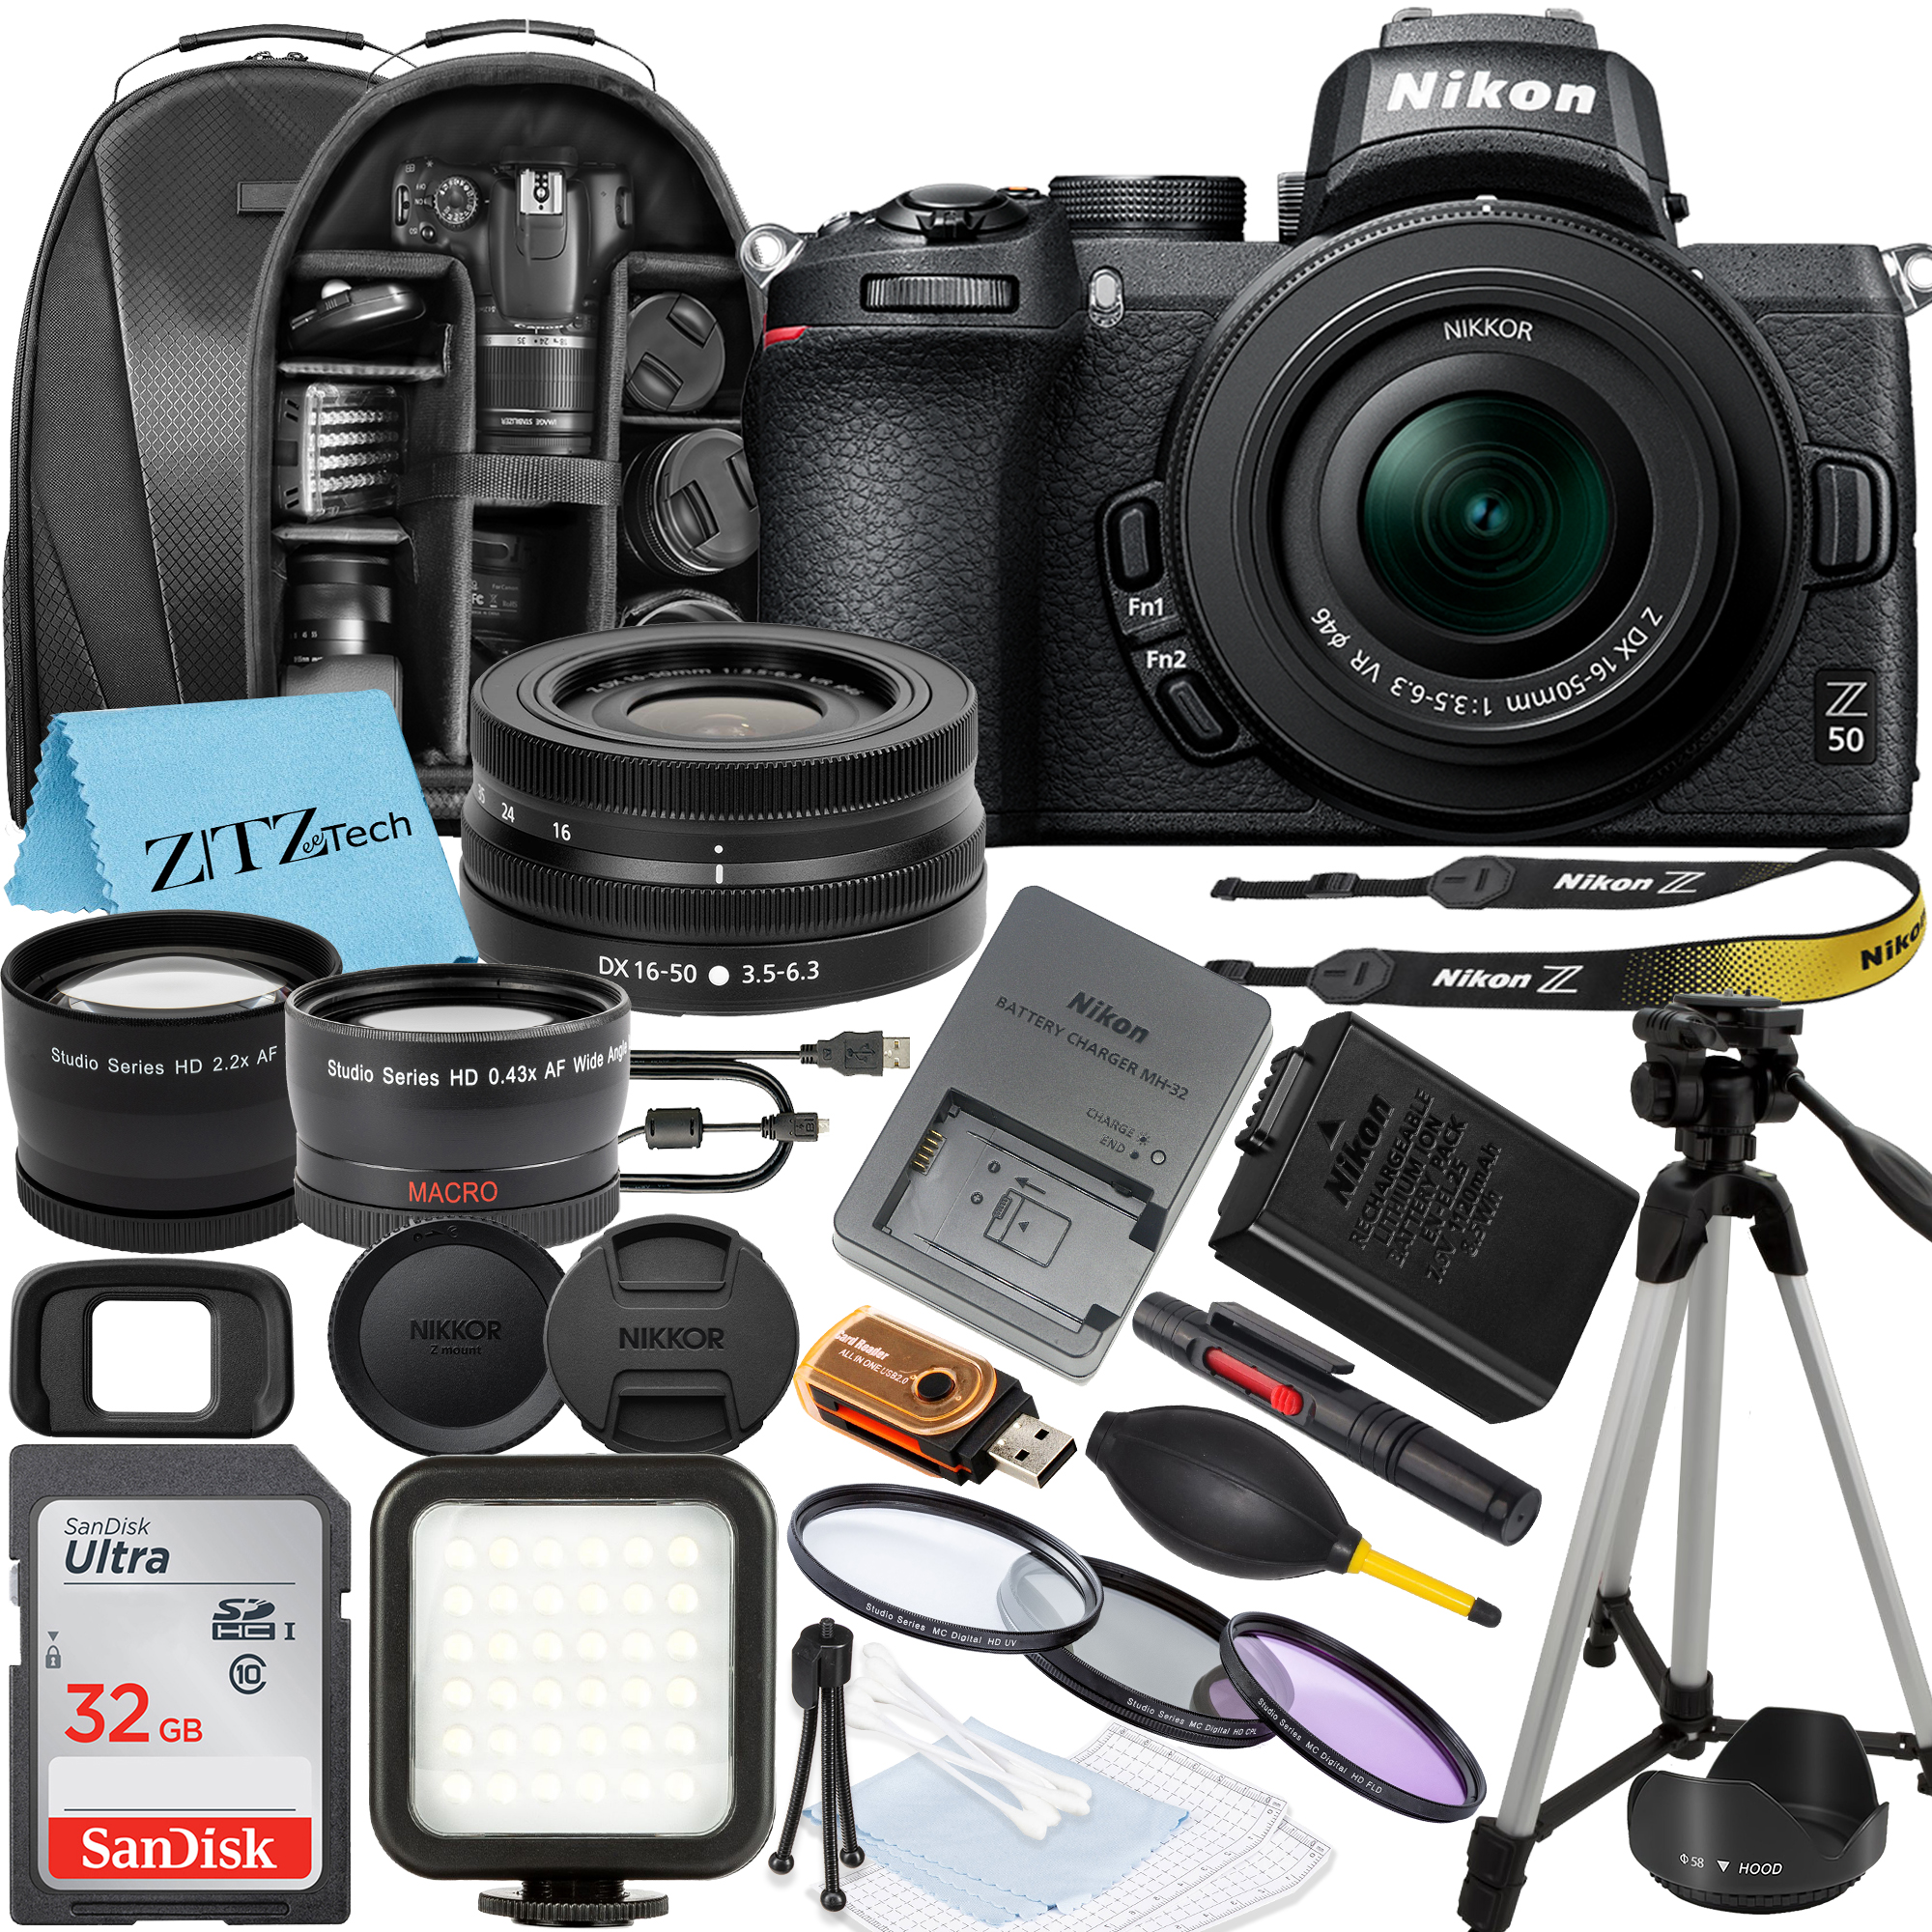 Nikon Z50 Mirrorless Camera with NIKKOR Z DX 16-50mm VR Zoom Lens, SanDisk 32GB Memory Card, Backpack, Flash, Tripod and ZeeTech Accessory Bundle